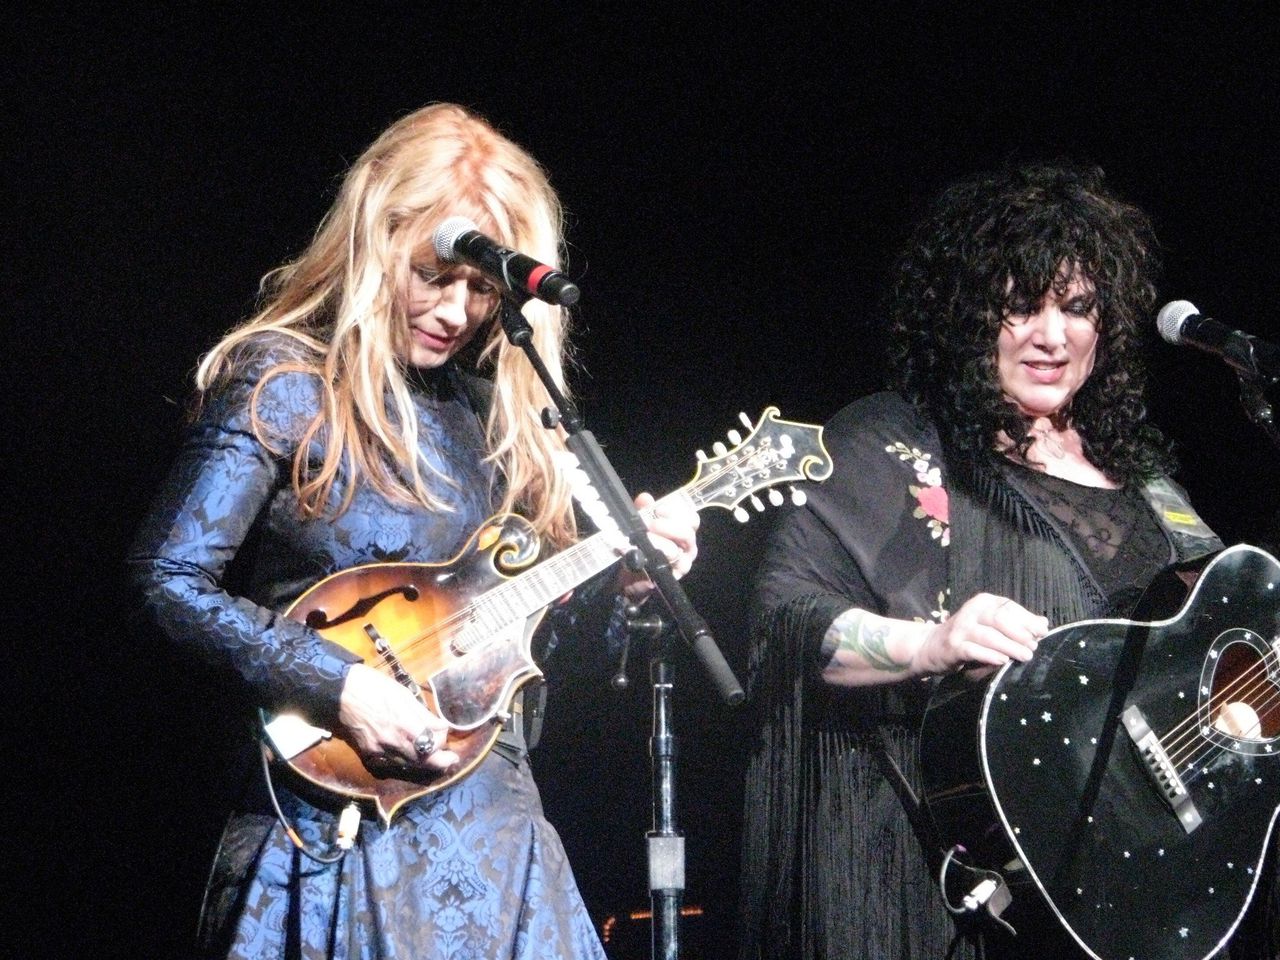 Heart, with Ann and Nancy Wilson, turn back the clock and turn up the heat (review)